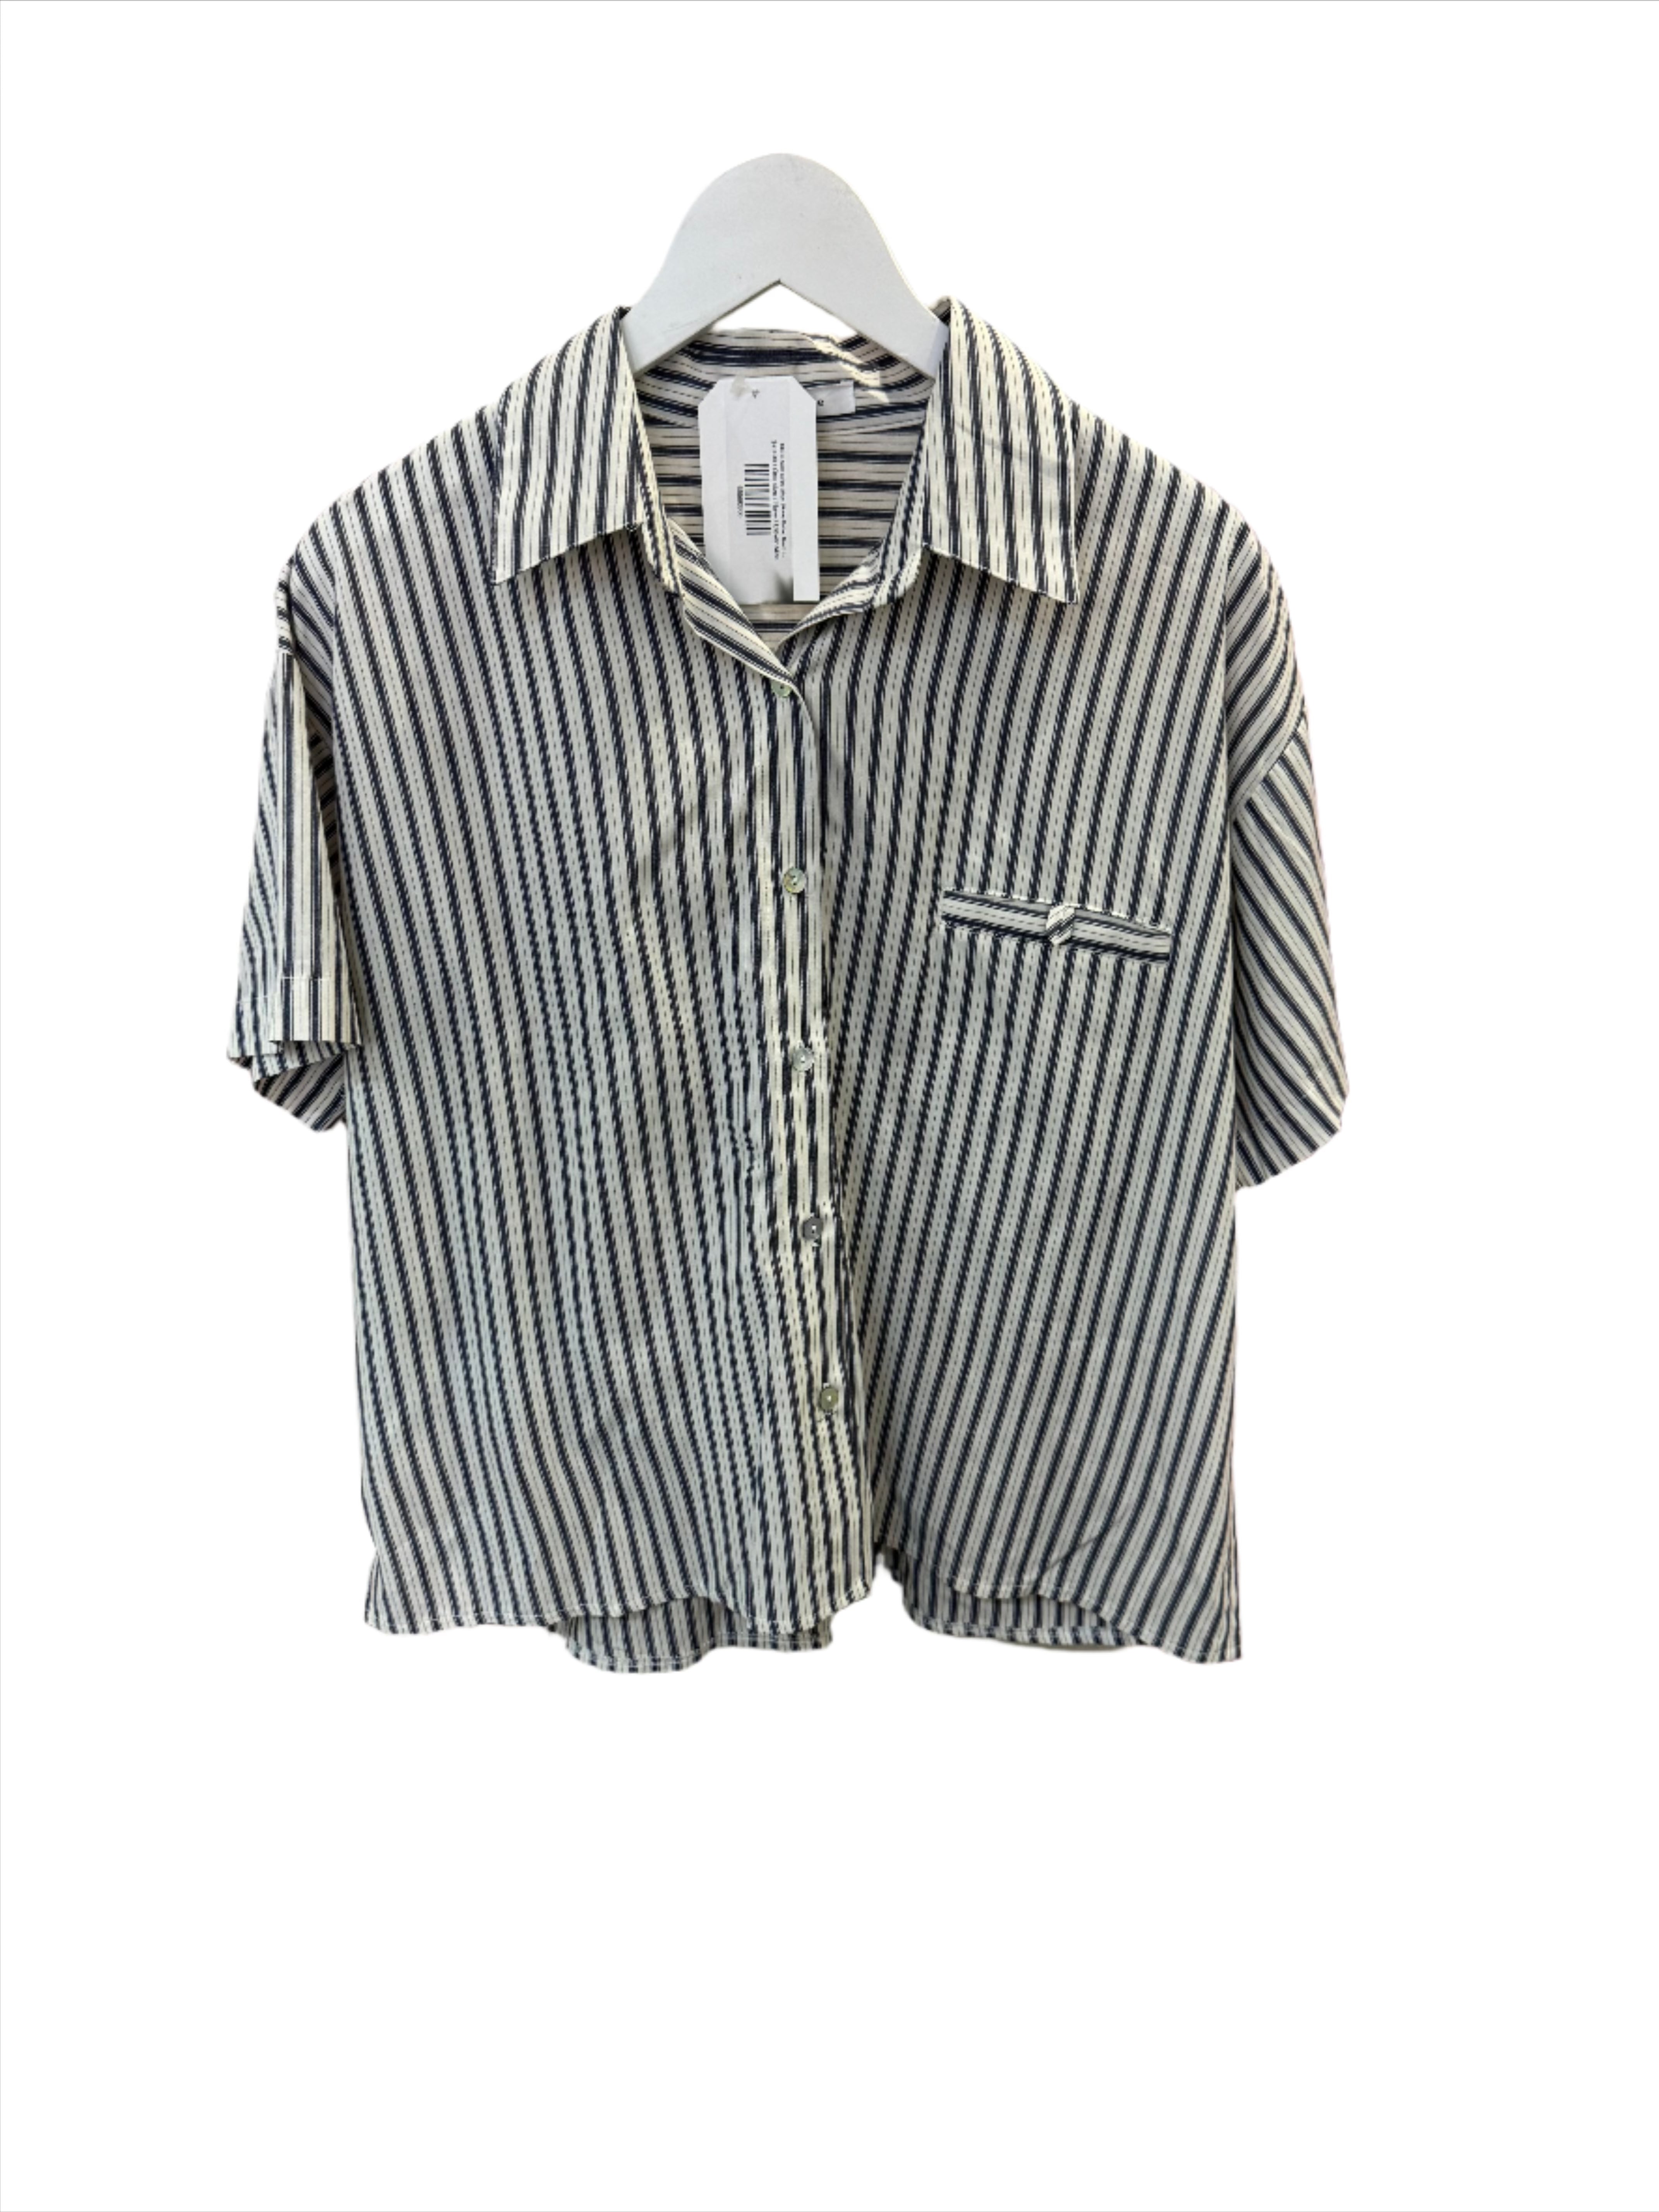 Clever Alice Stripe Short Sleeve Button Down in Sky or Navy